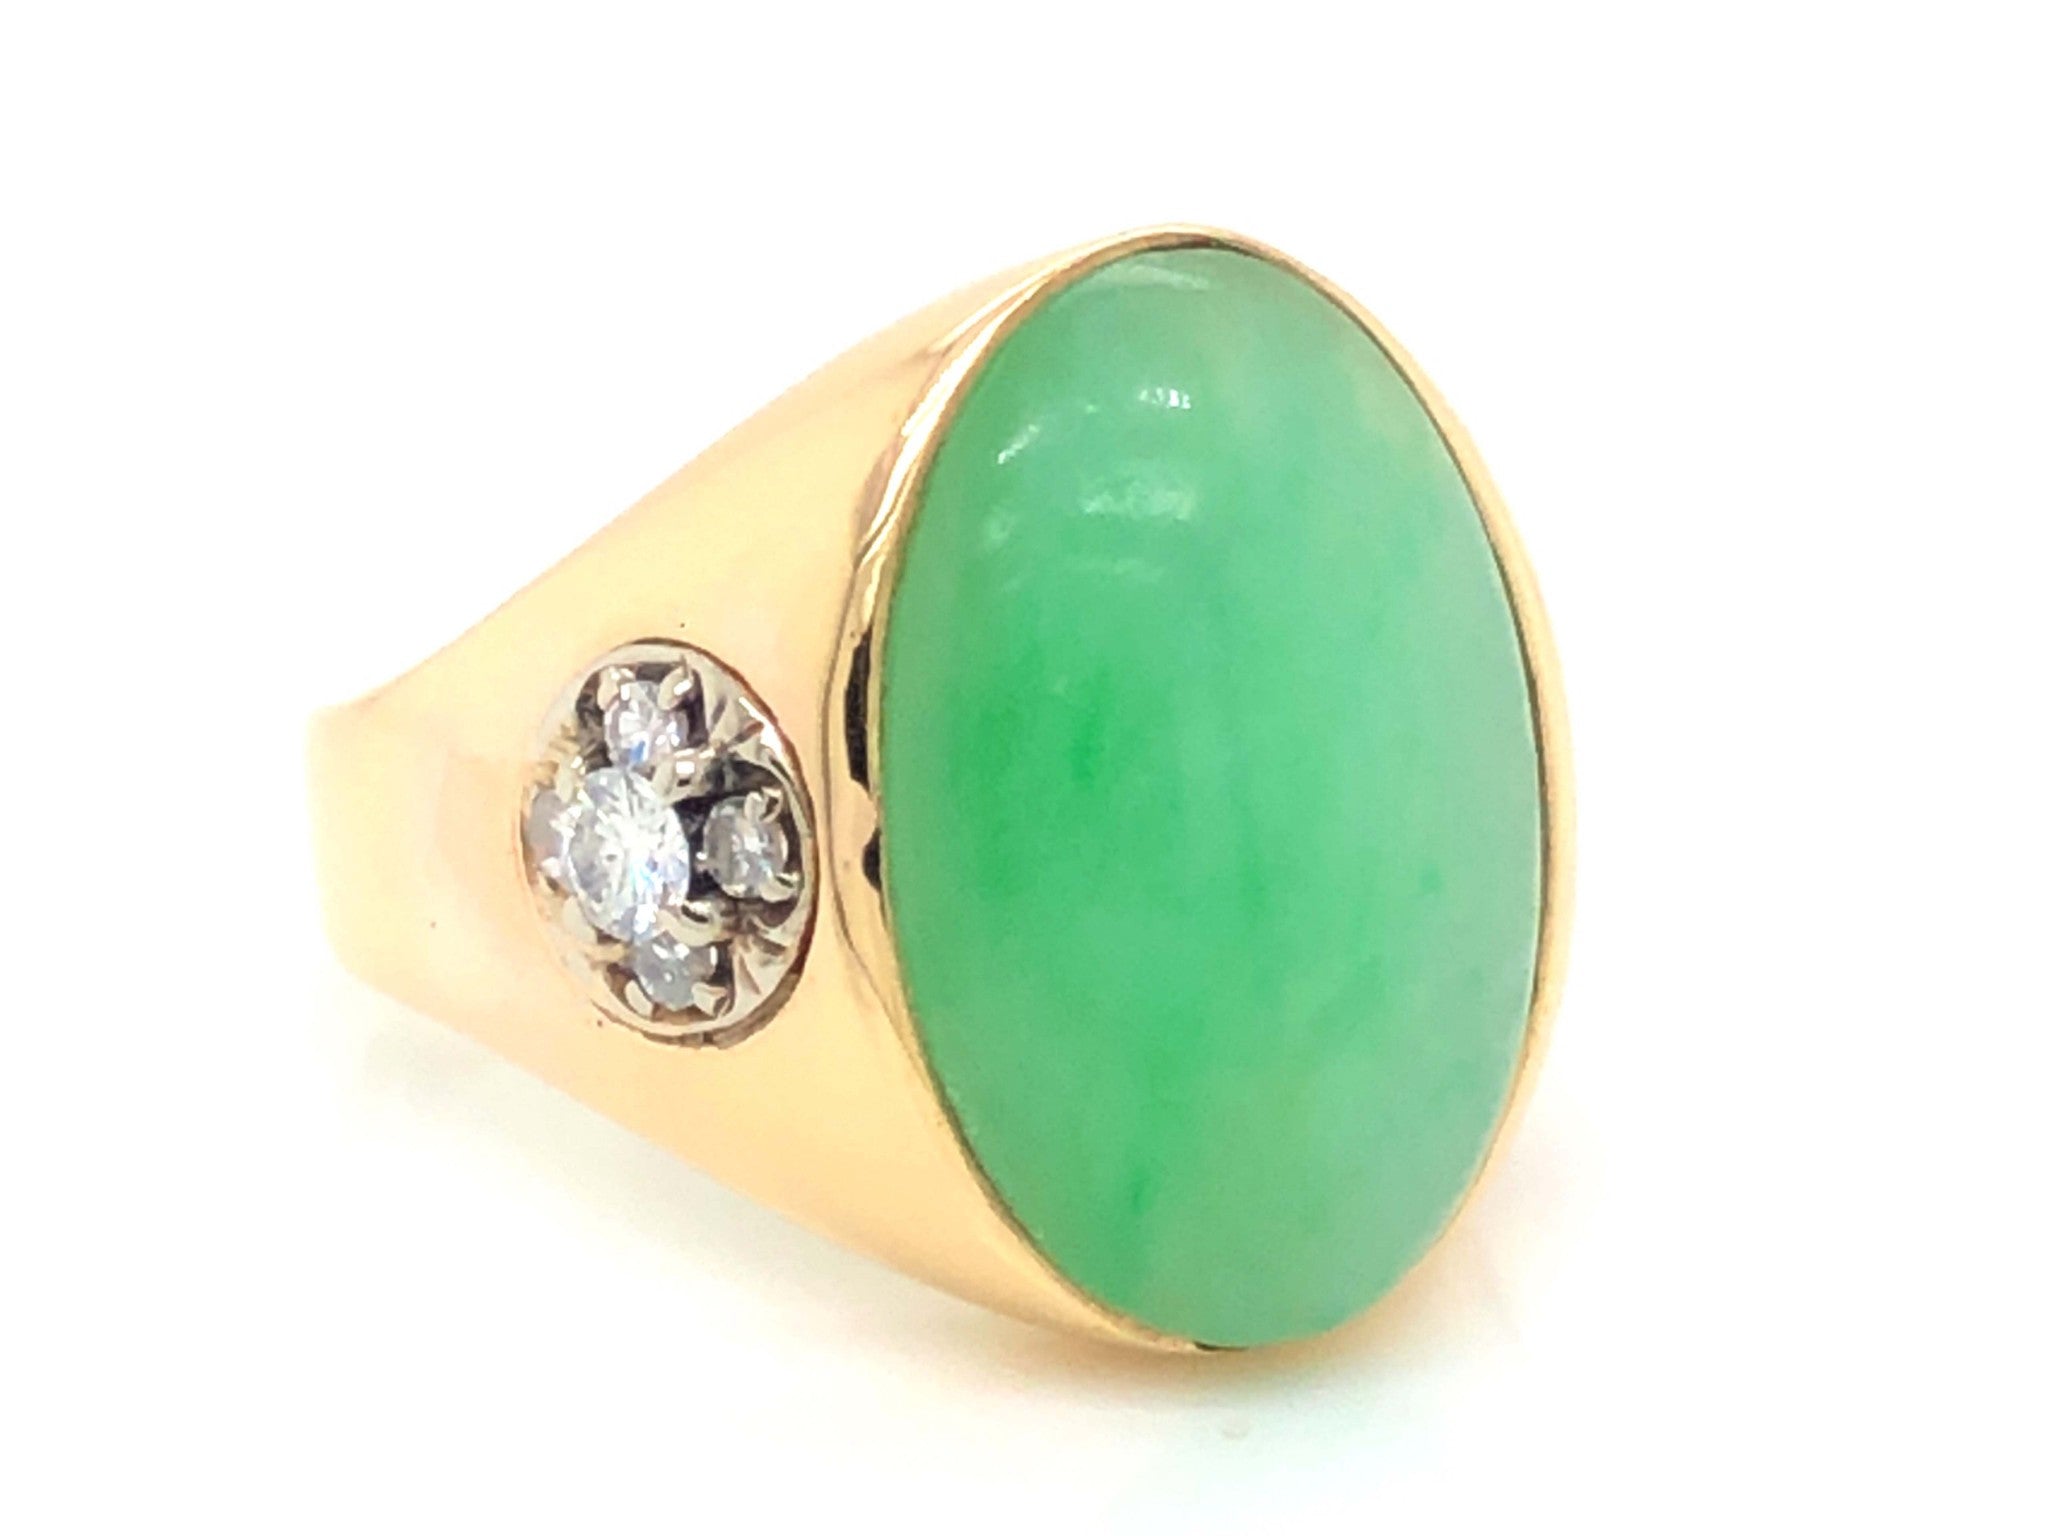 Men's Oval Pale Mottled Green Jade, Diamond and Ruby Ring - 14k Yellow Gold